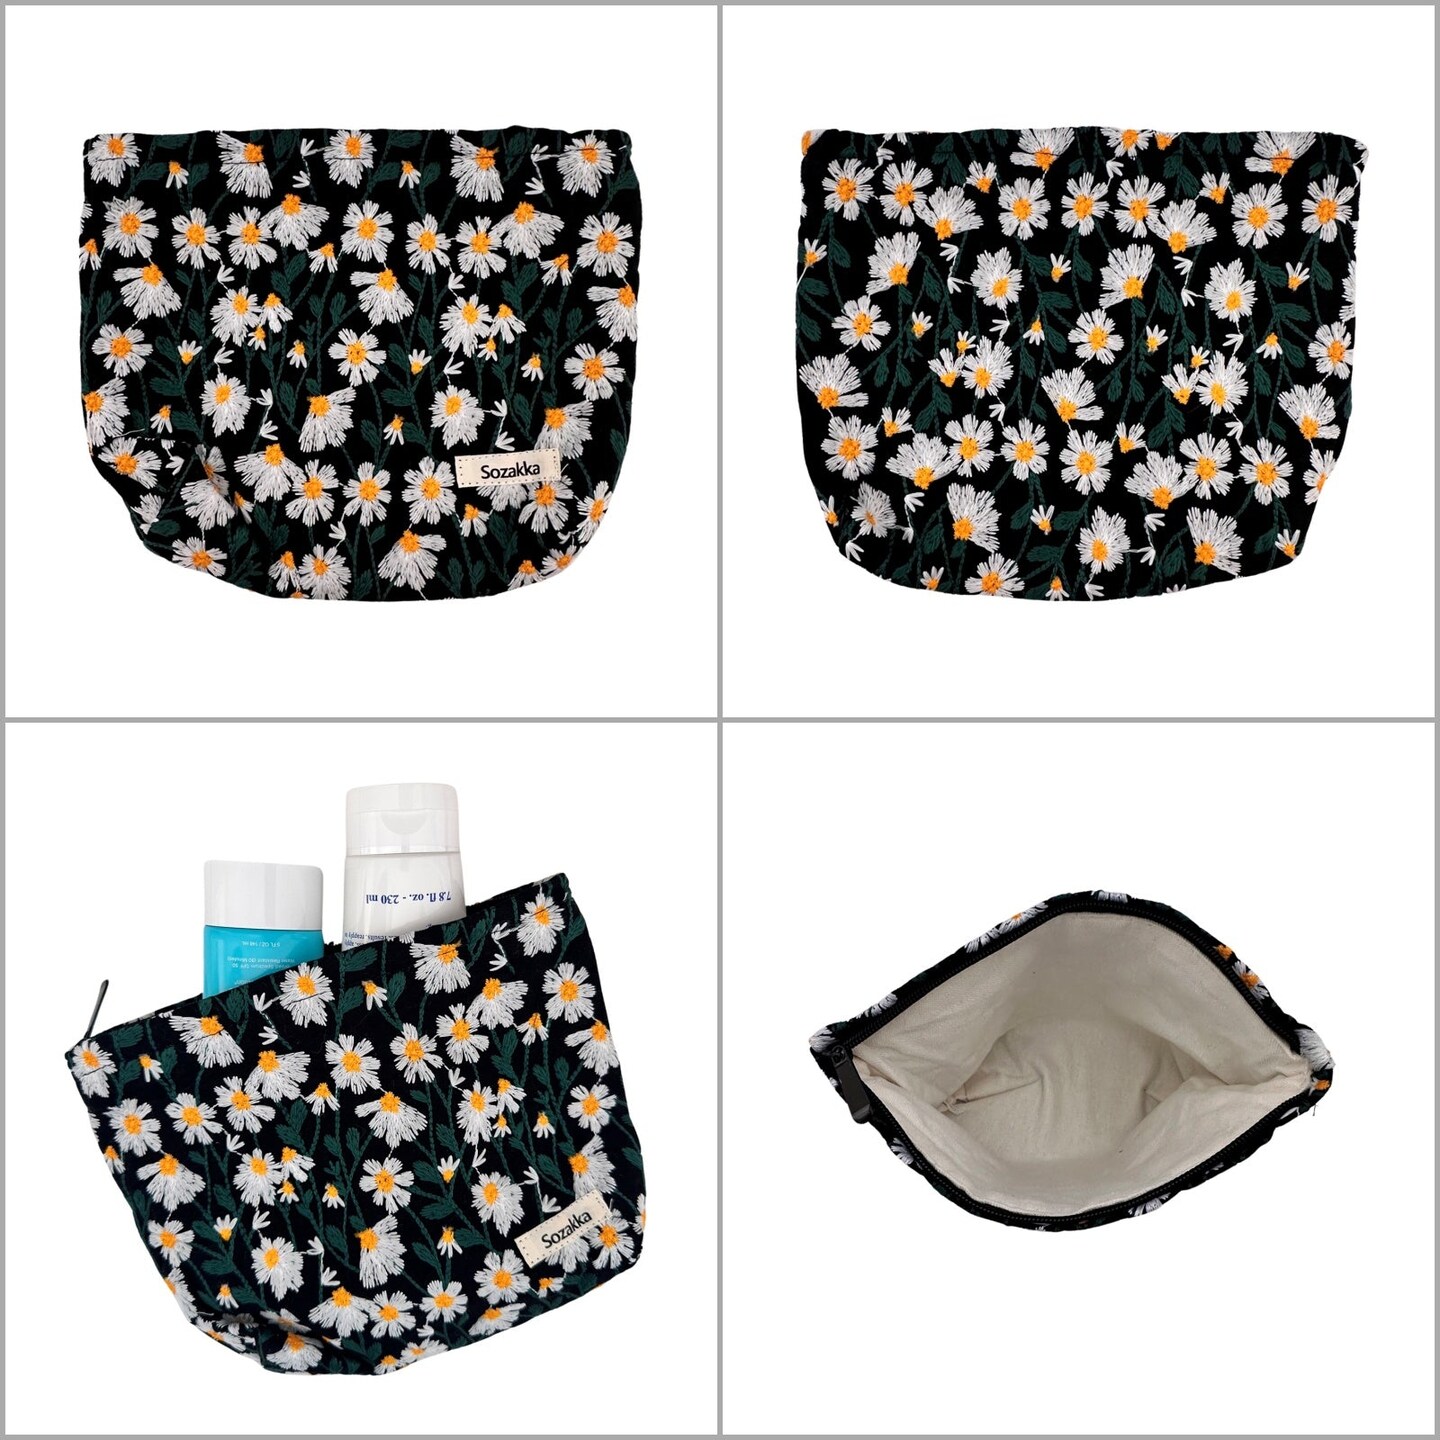 Wrapables Cosmetic Pouch, Makeup and Toiletry Travel Bag, Embroidered Daisy